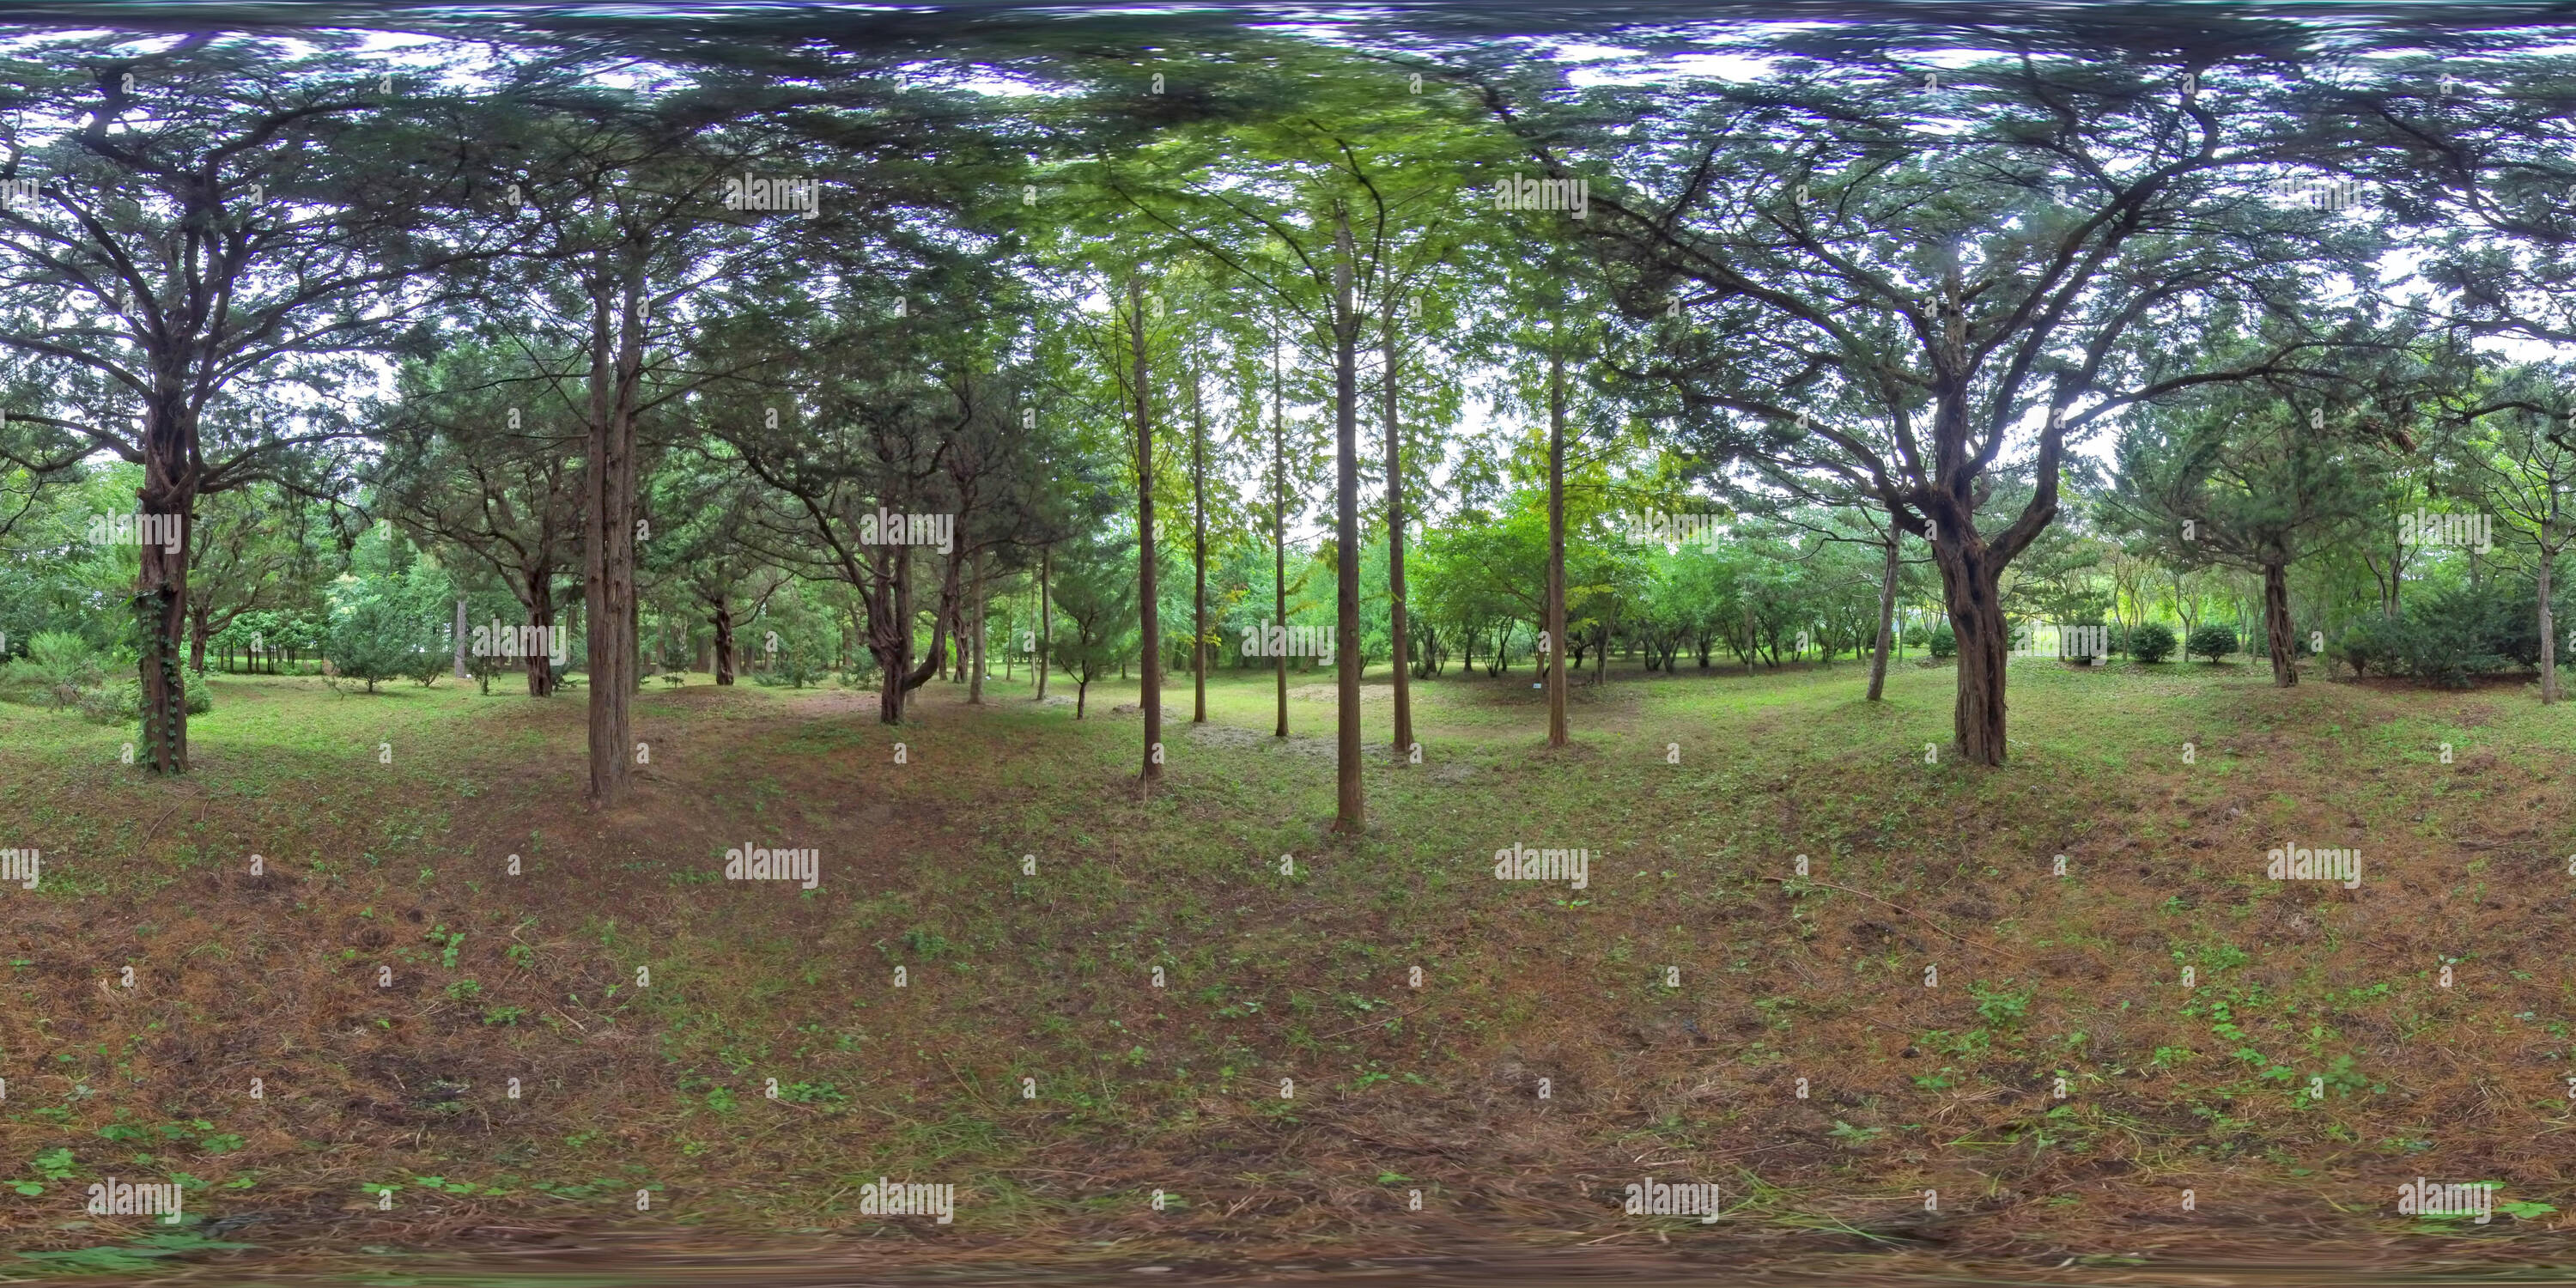 360 degree panoramic view of Gyeongju, South Korea 27 August 2019: 360VR Arboretum in Korea. Garden and Park. AR/VR content.